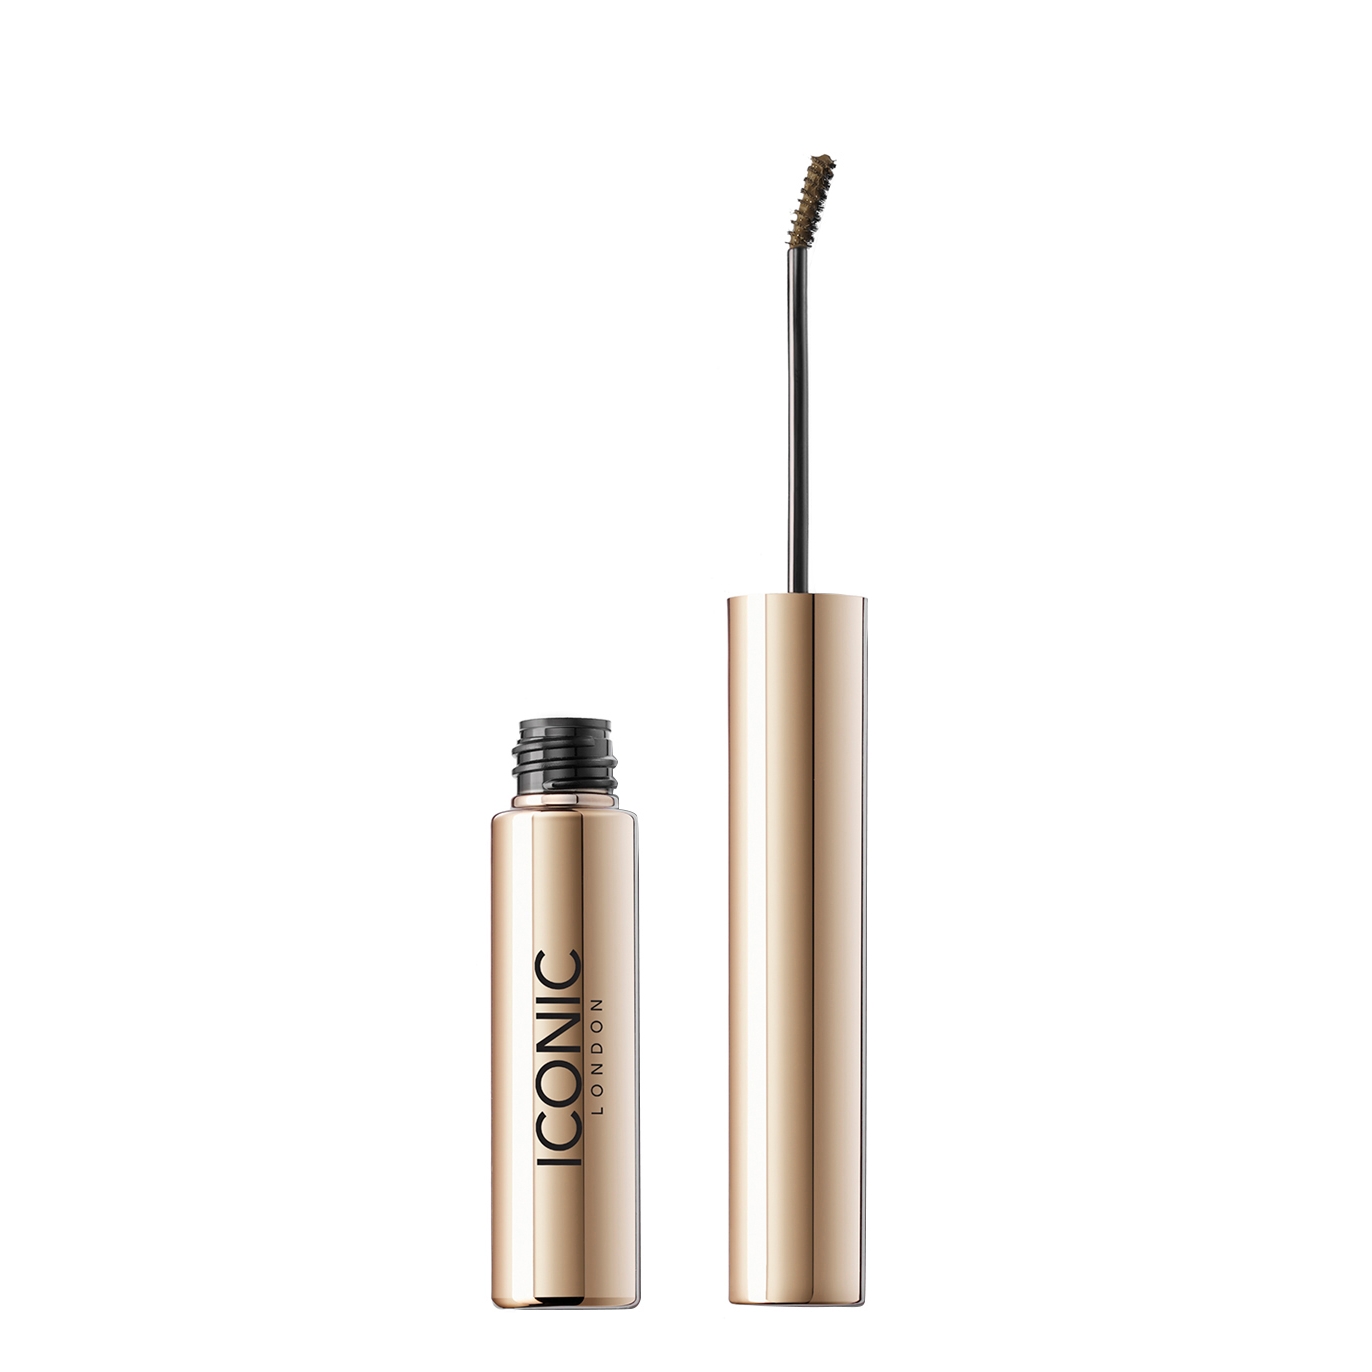 Iconic London Tint & Texture Brow-Perfecting Gel